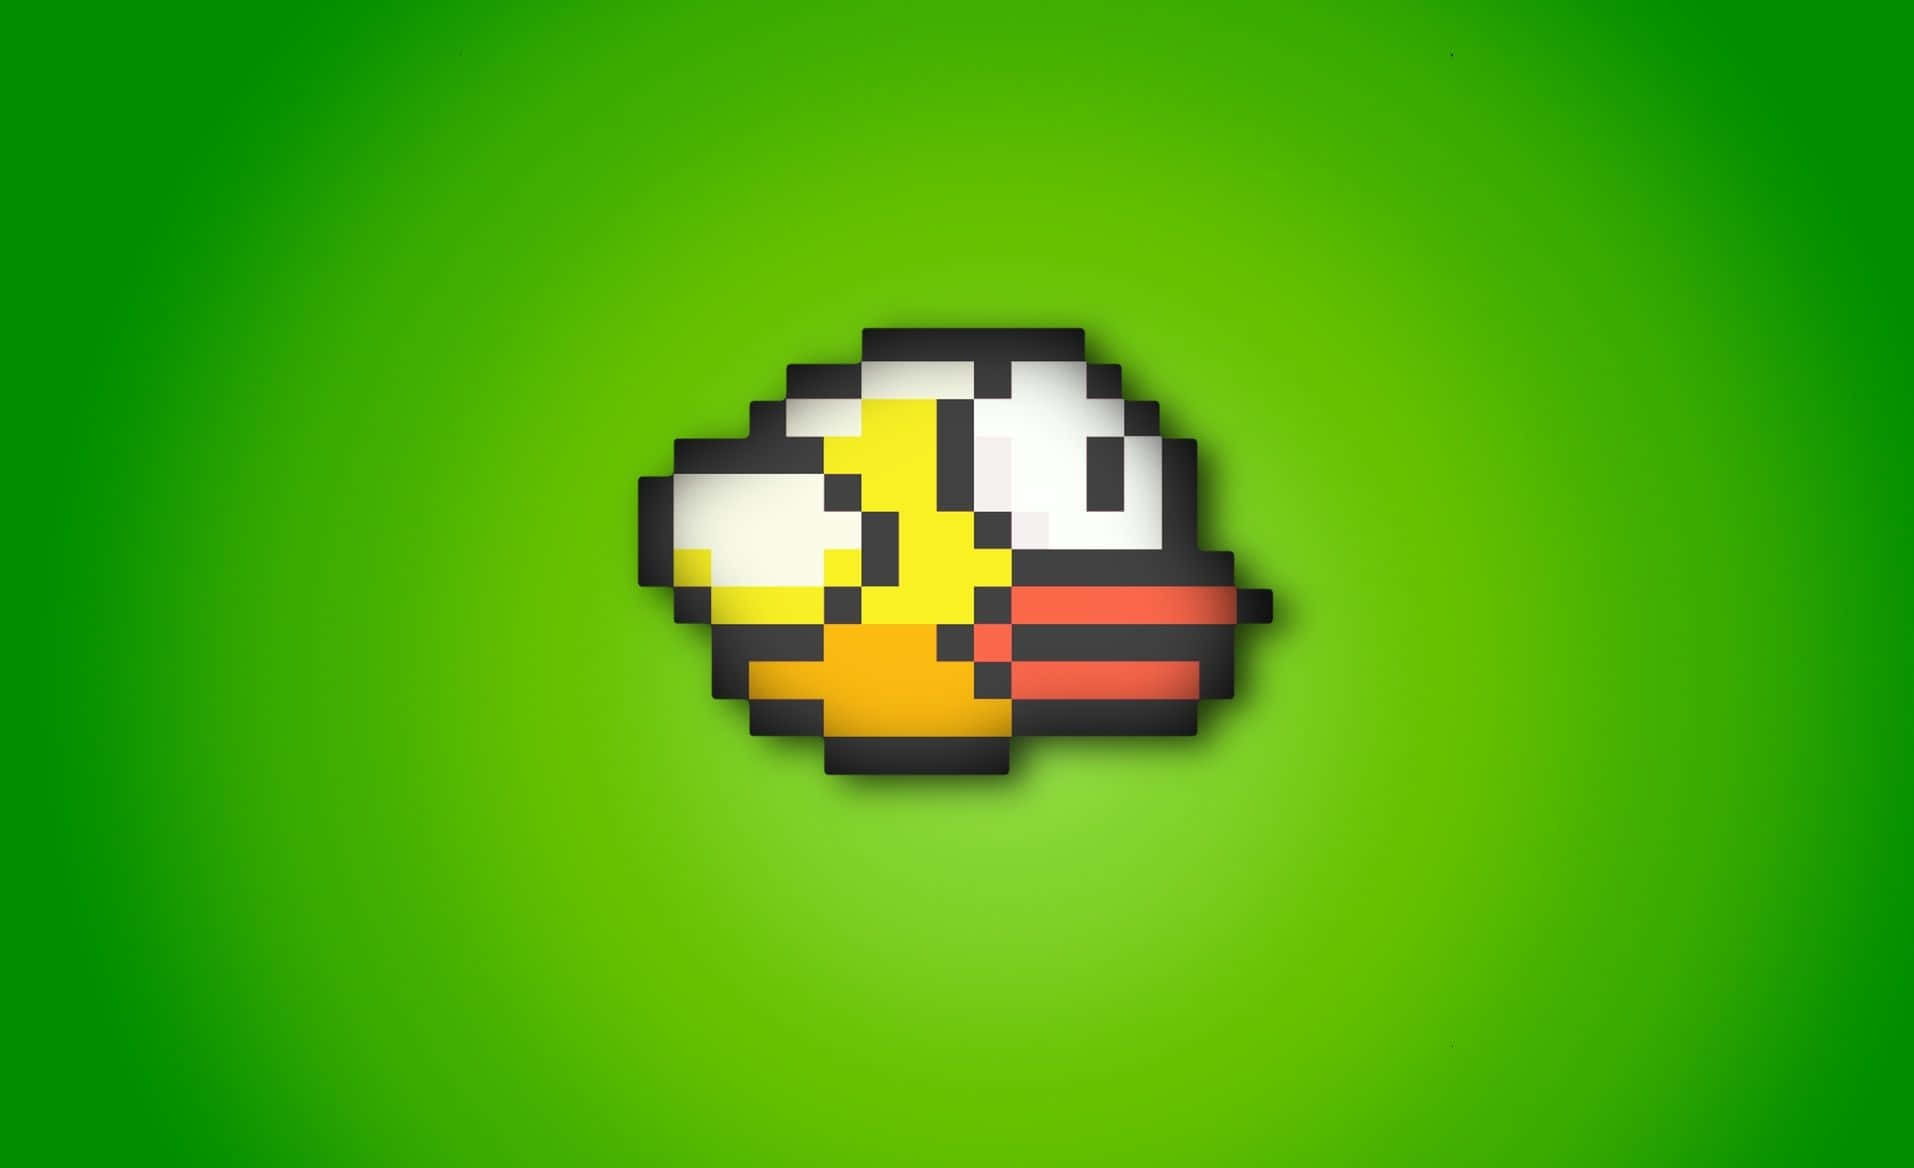 Flappy Bird: The Most Popular Mobile Game of its Time